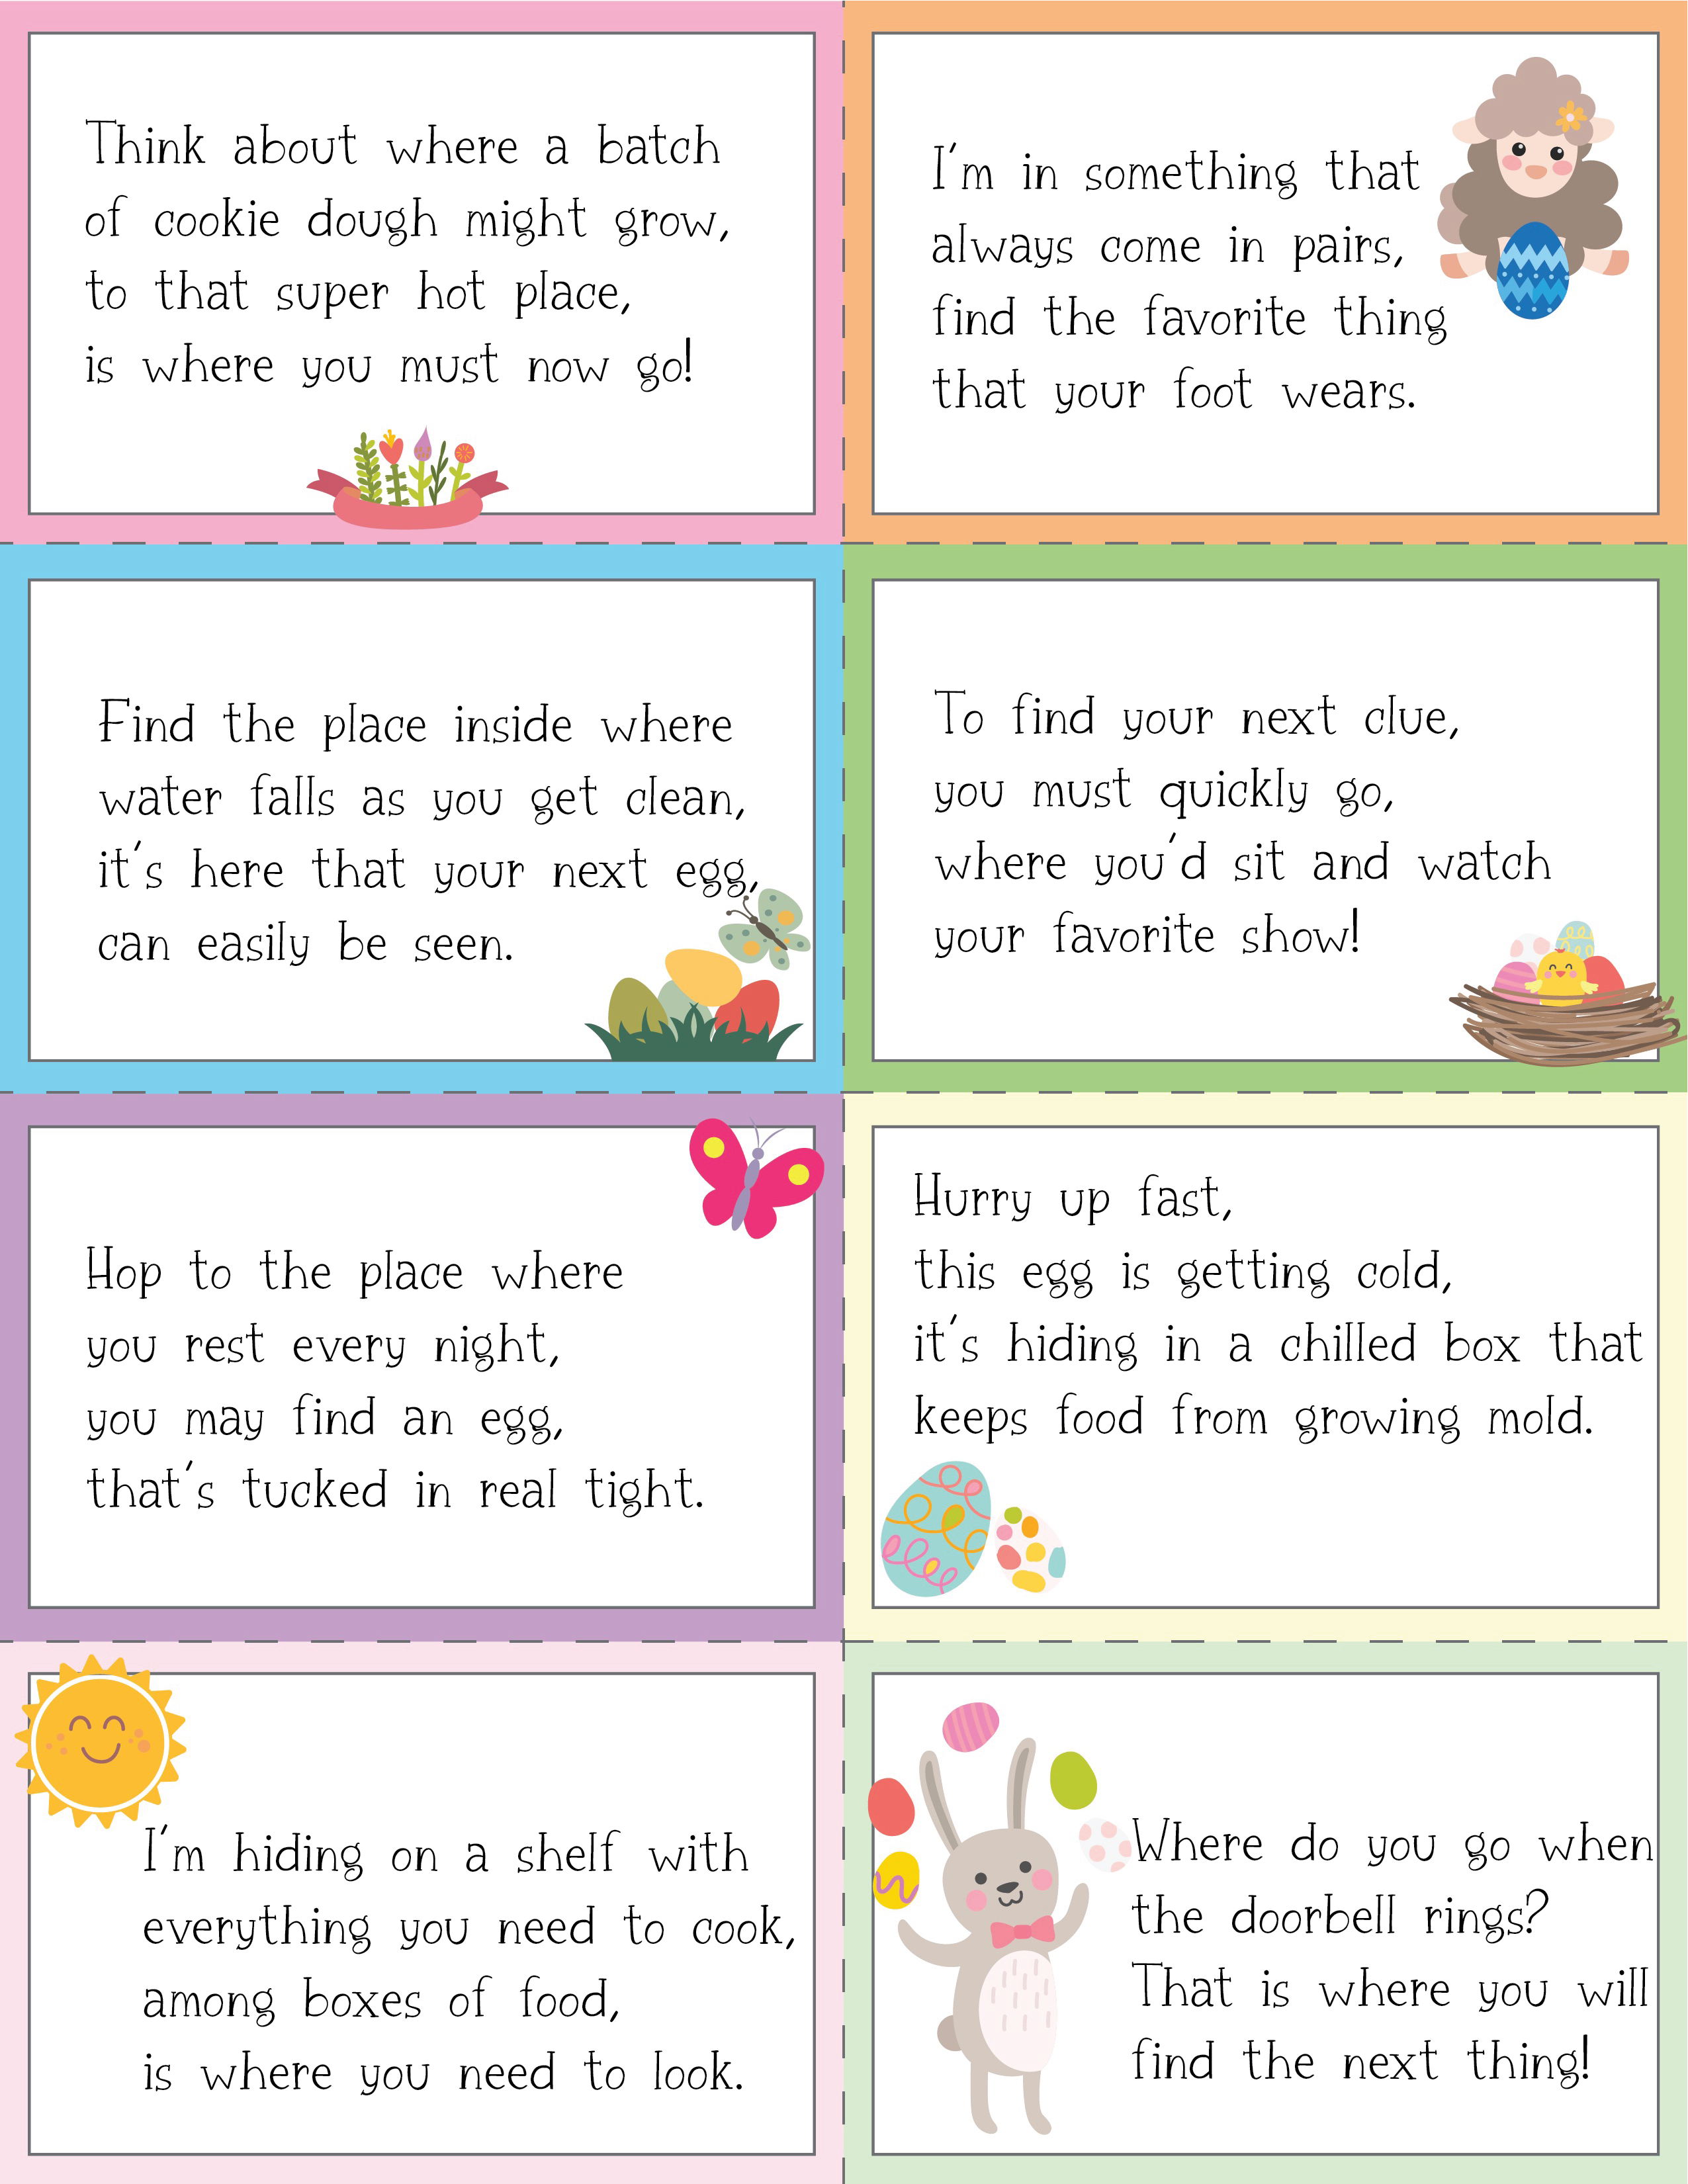 48 Free Printable Easter Egg Hunt Clues for Kids - Play Party Plan